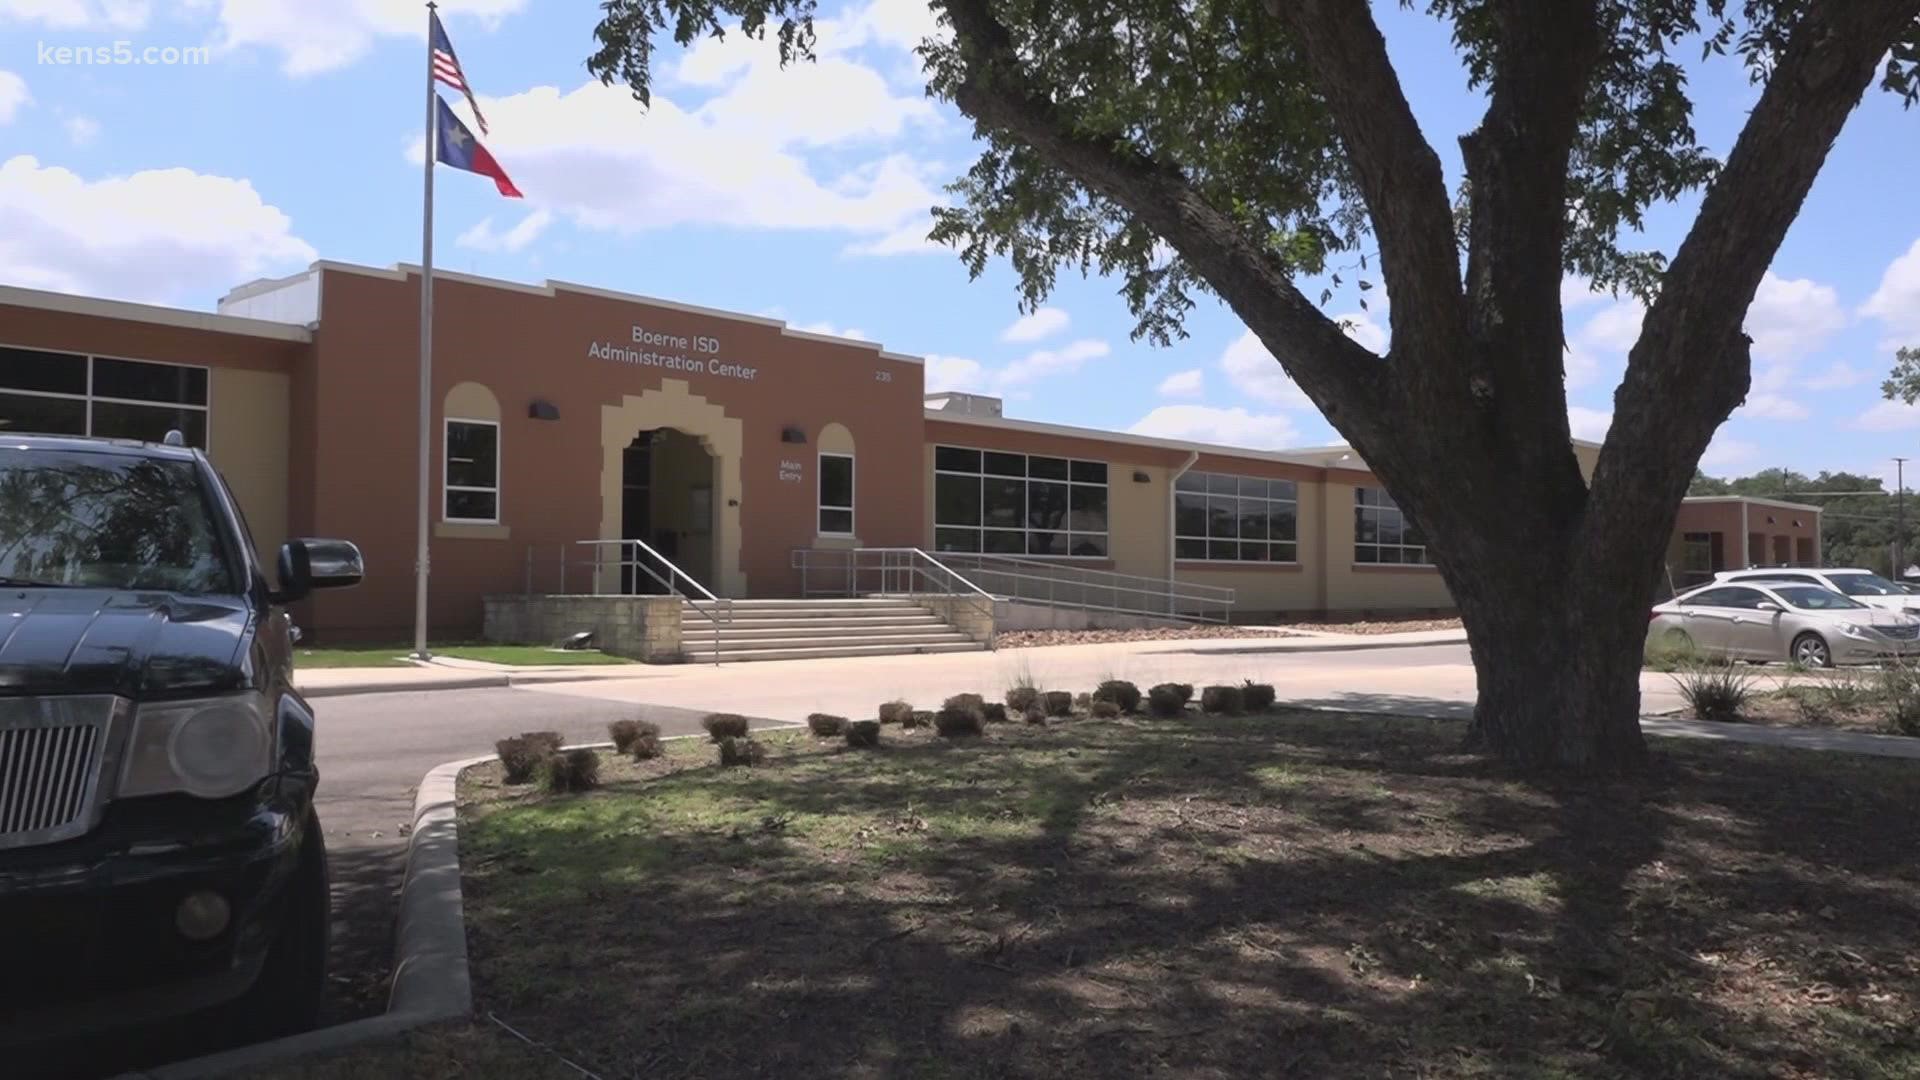 In the first two weeks of school, 93 cases have been reported throughout Boerne ISD.